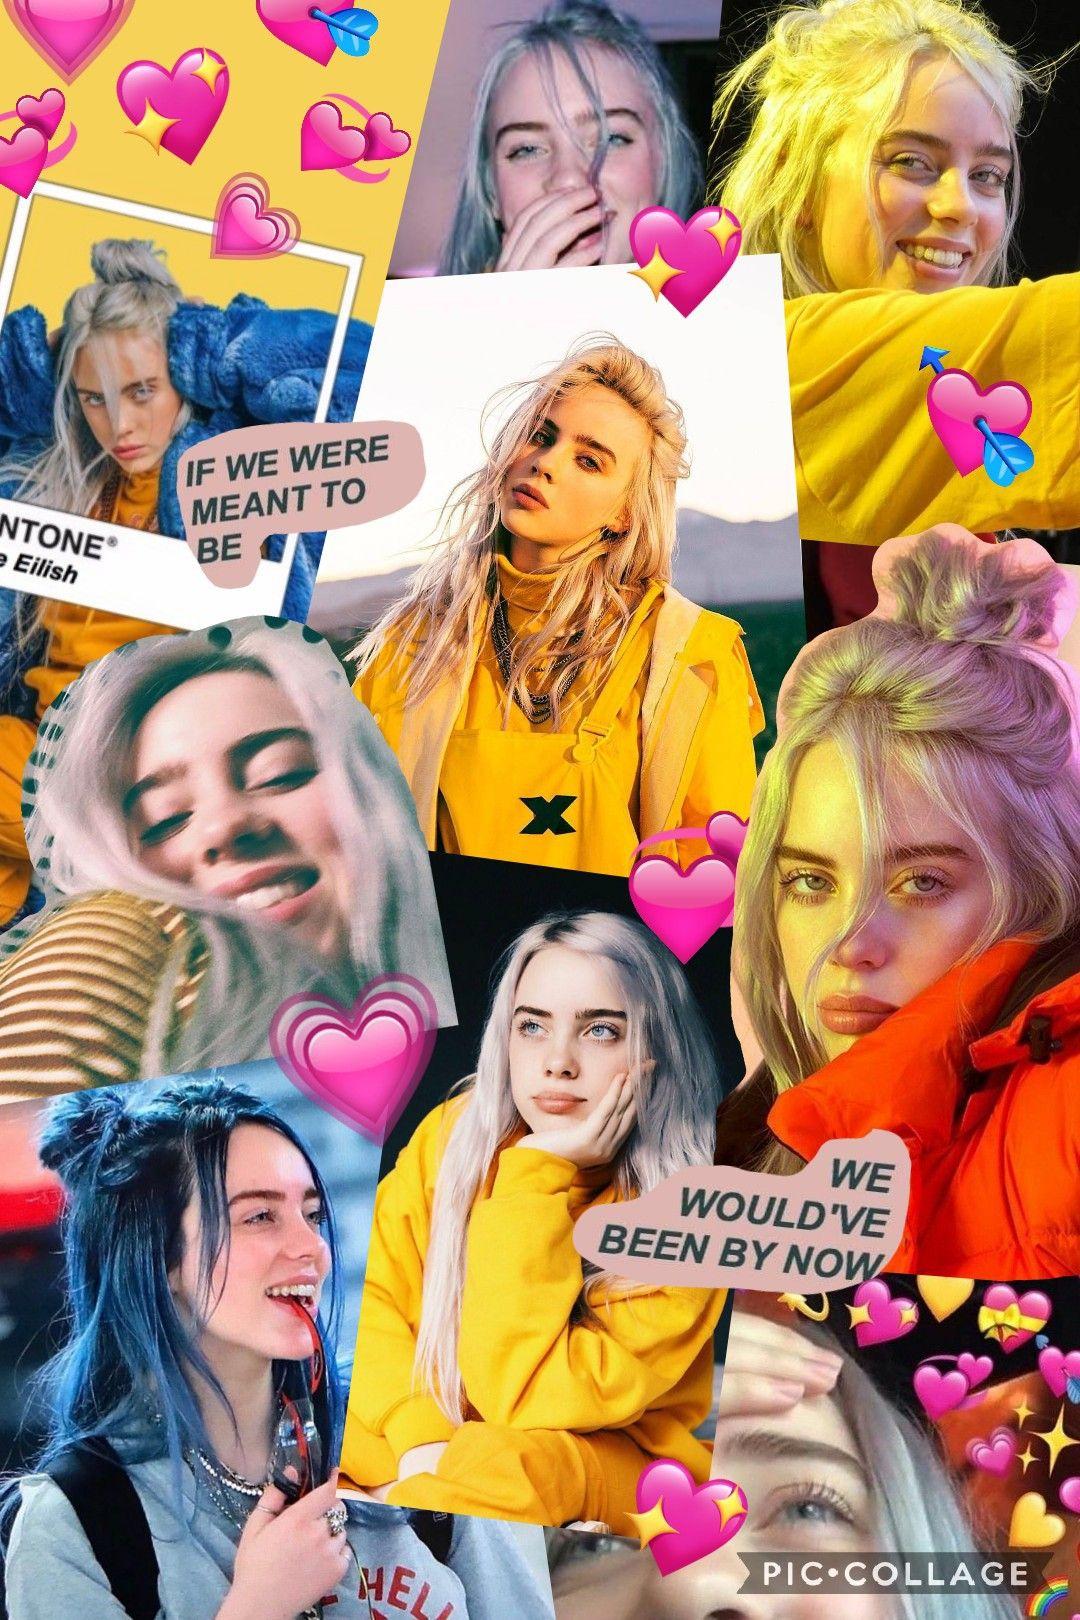 Billie eilish collage wallpaper made by me! Feel free to use